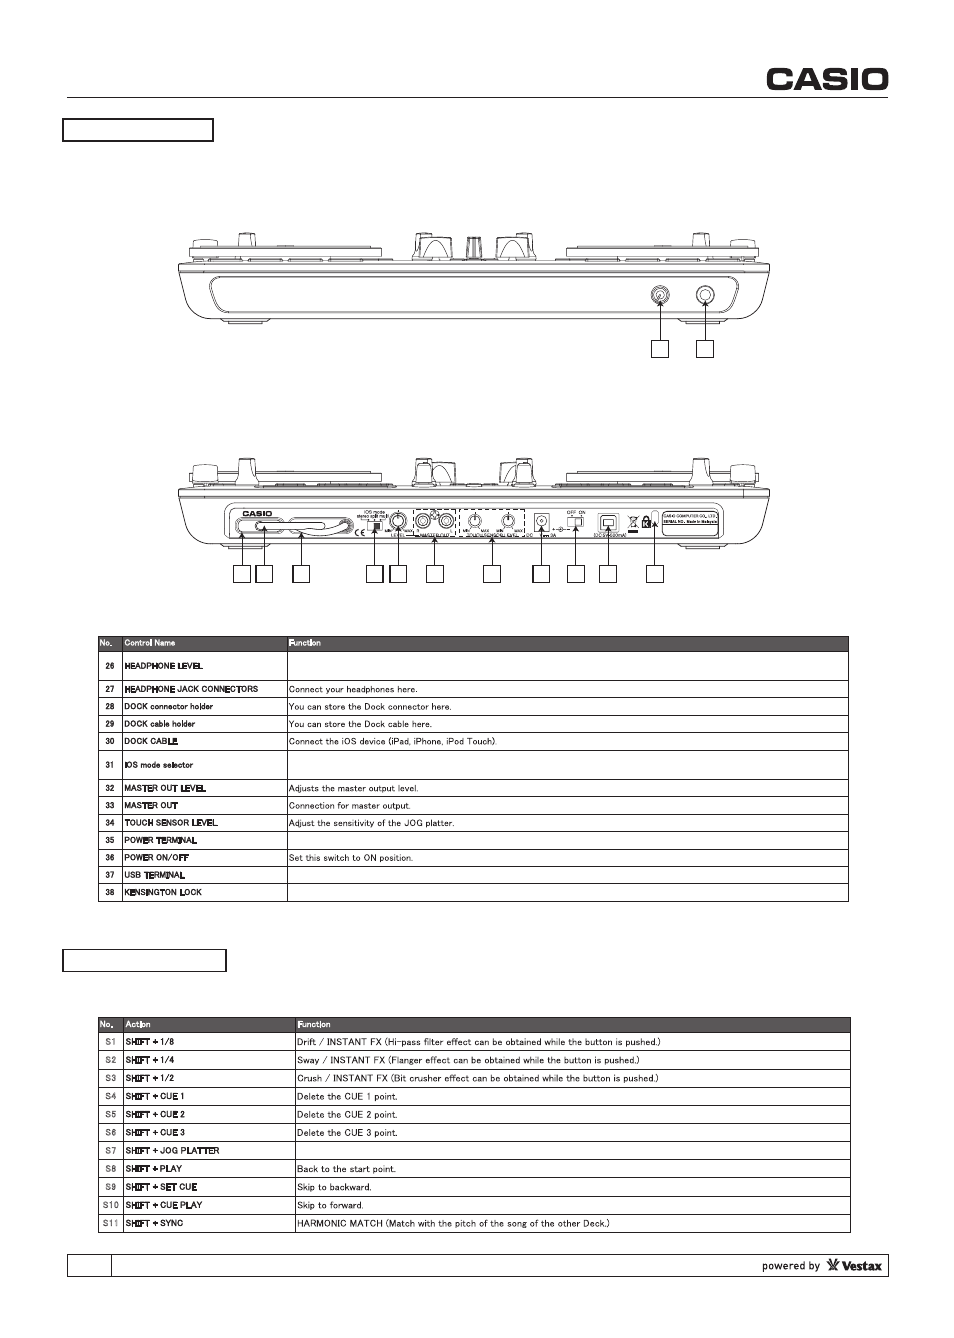 Front & rear, Shift function, Vjay & djay app | Casio XW-J1 User Manual |  Page 8 / 20